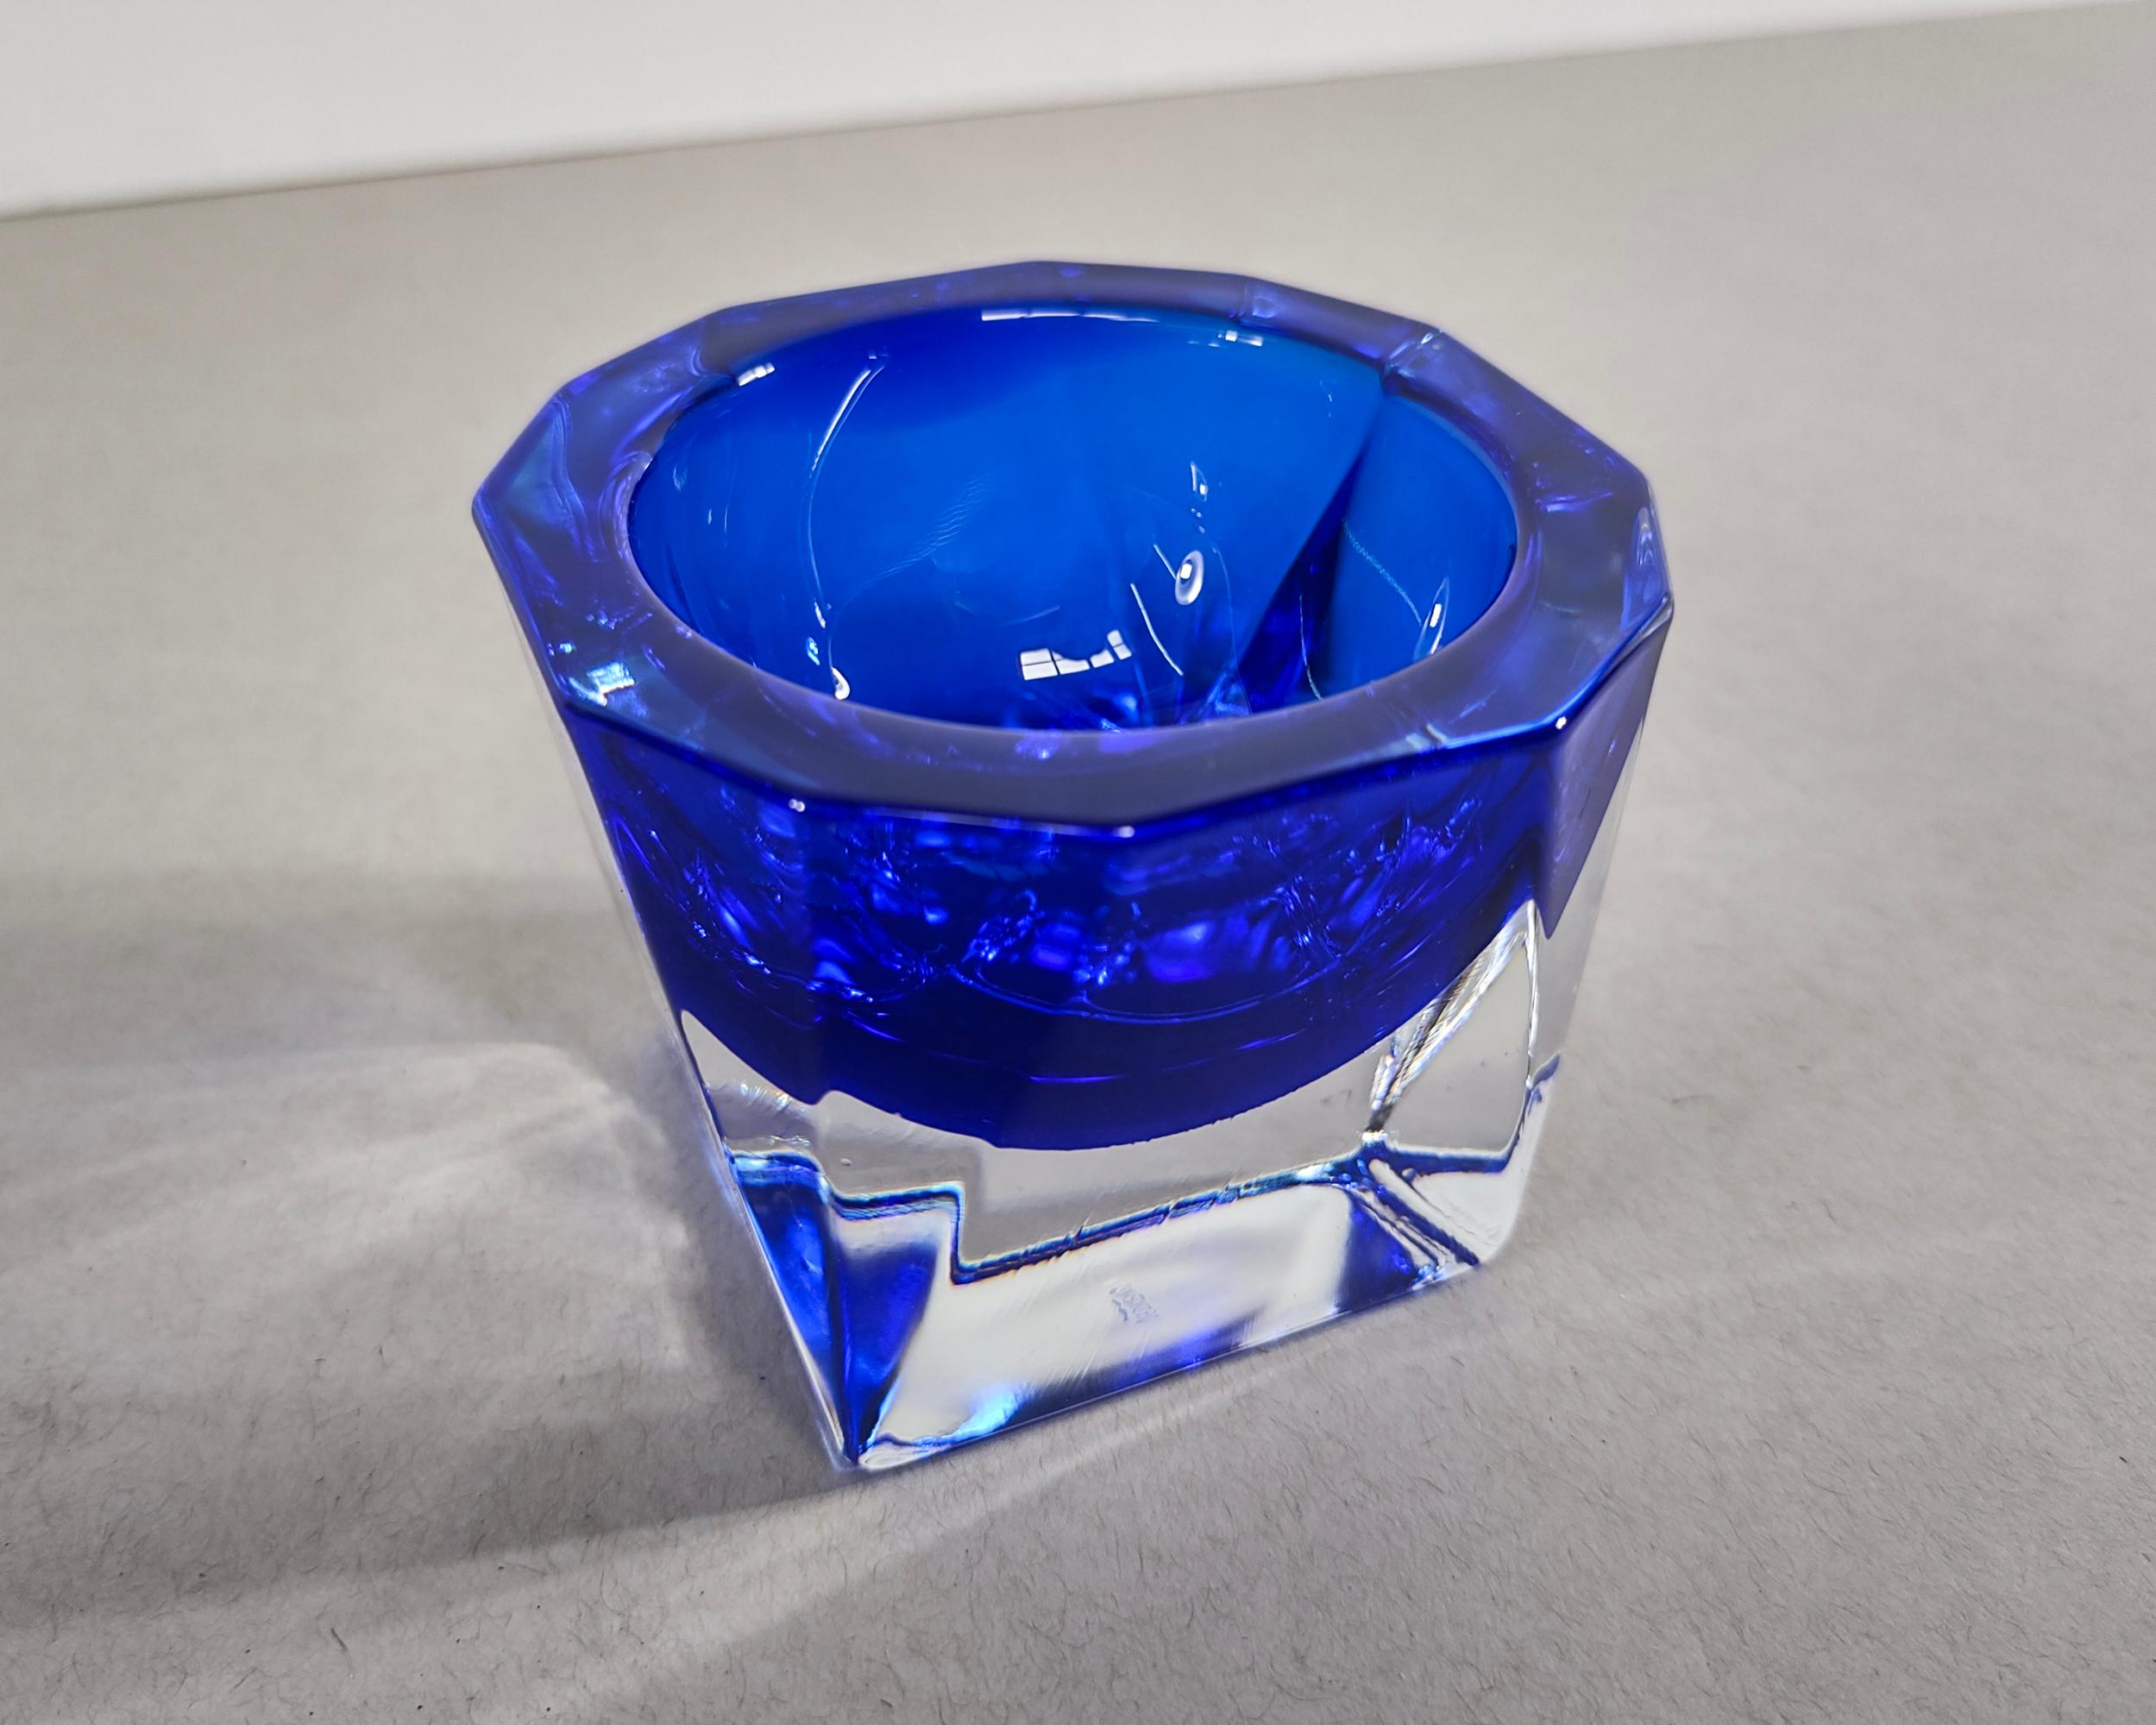 Vintage cobalt blue and thick clear glass candle holder. Faceted corners and thick heavy base. Signed J.G. Durand. Excellent vintage condition.

3.25